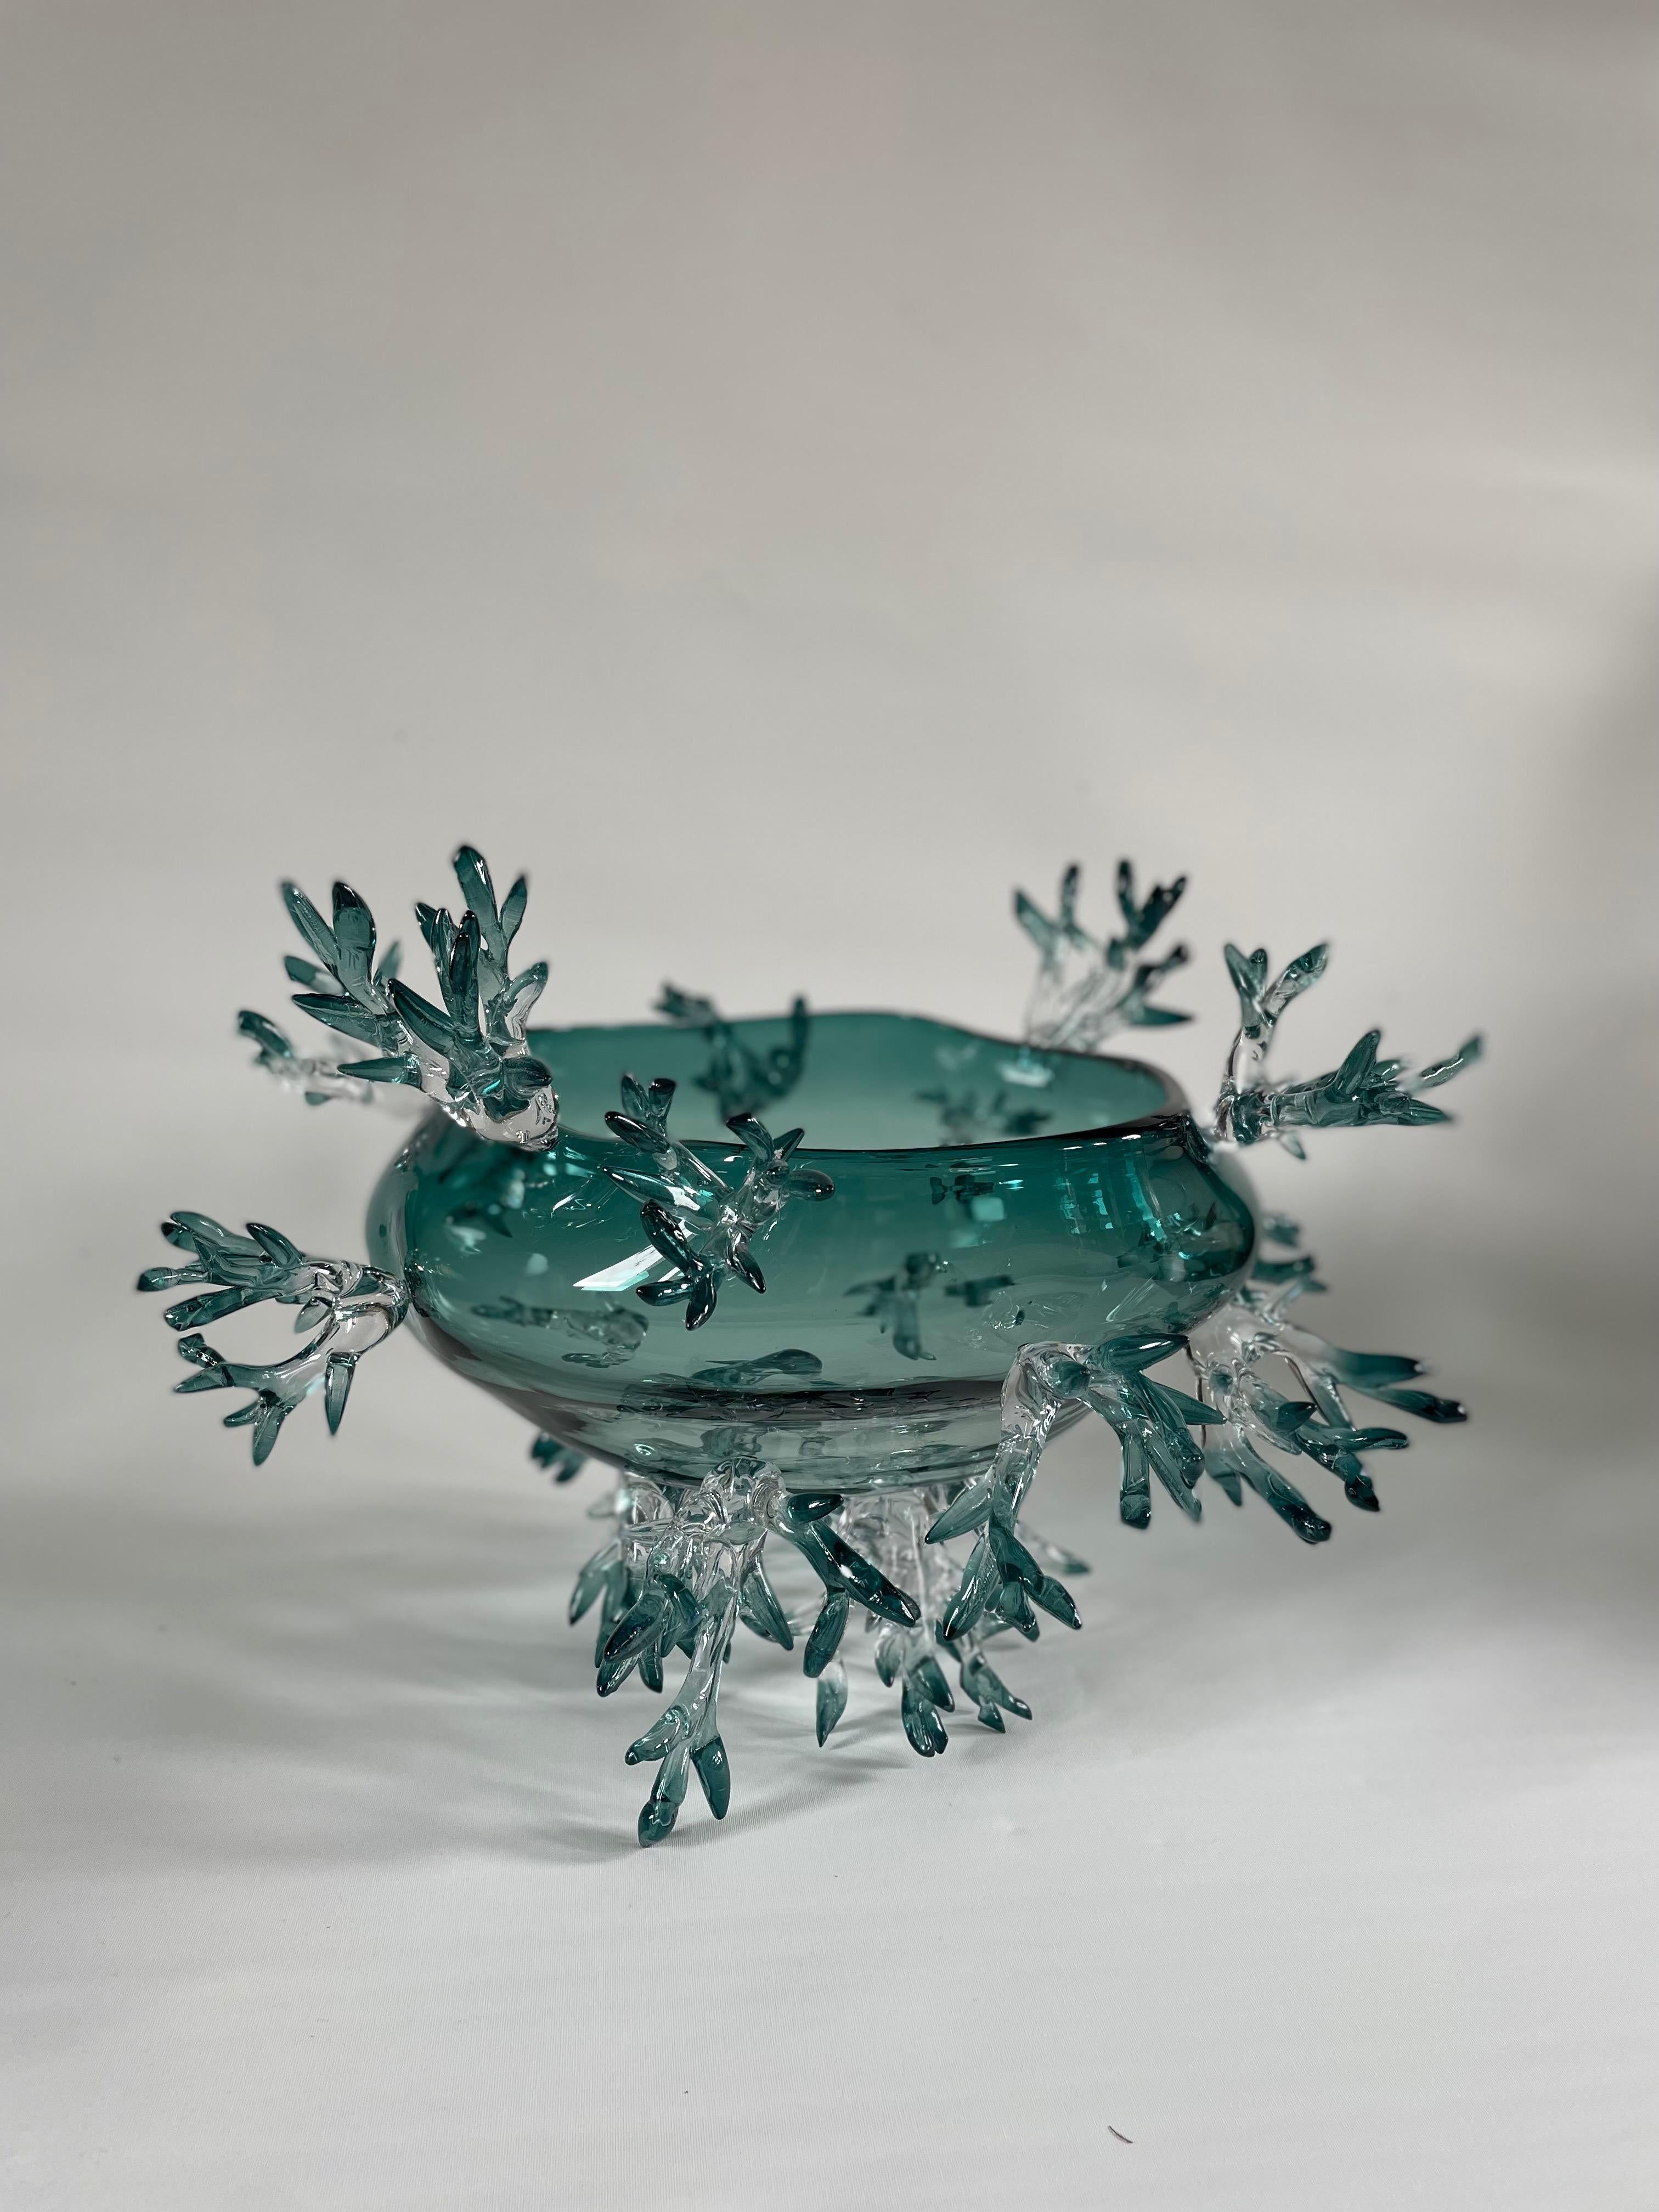 Basket Shape Green Vase by Emilie Lemardeley
Unique Piece
Dimensions: ⌀ 48 x H 38 cm
Materials: Hand blown glass.

DRYADE Collection
All in crystal, these large vases are raised and balanced on thin branches. Each Dryade vase is unique and has a